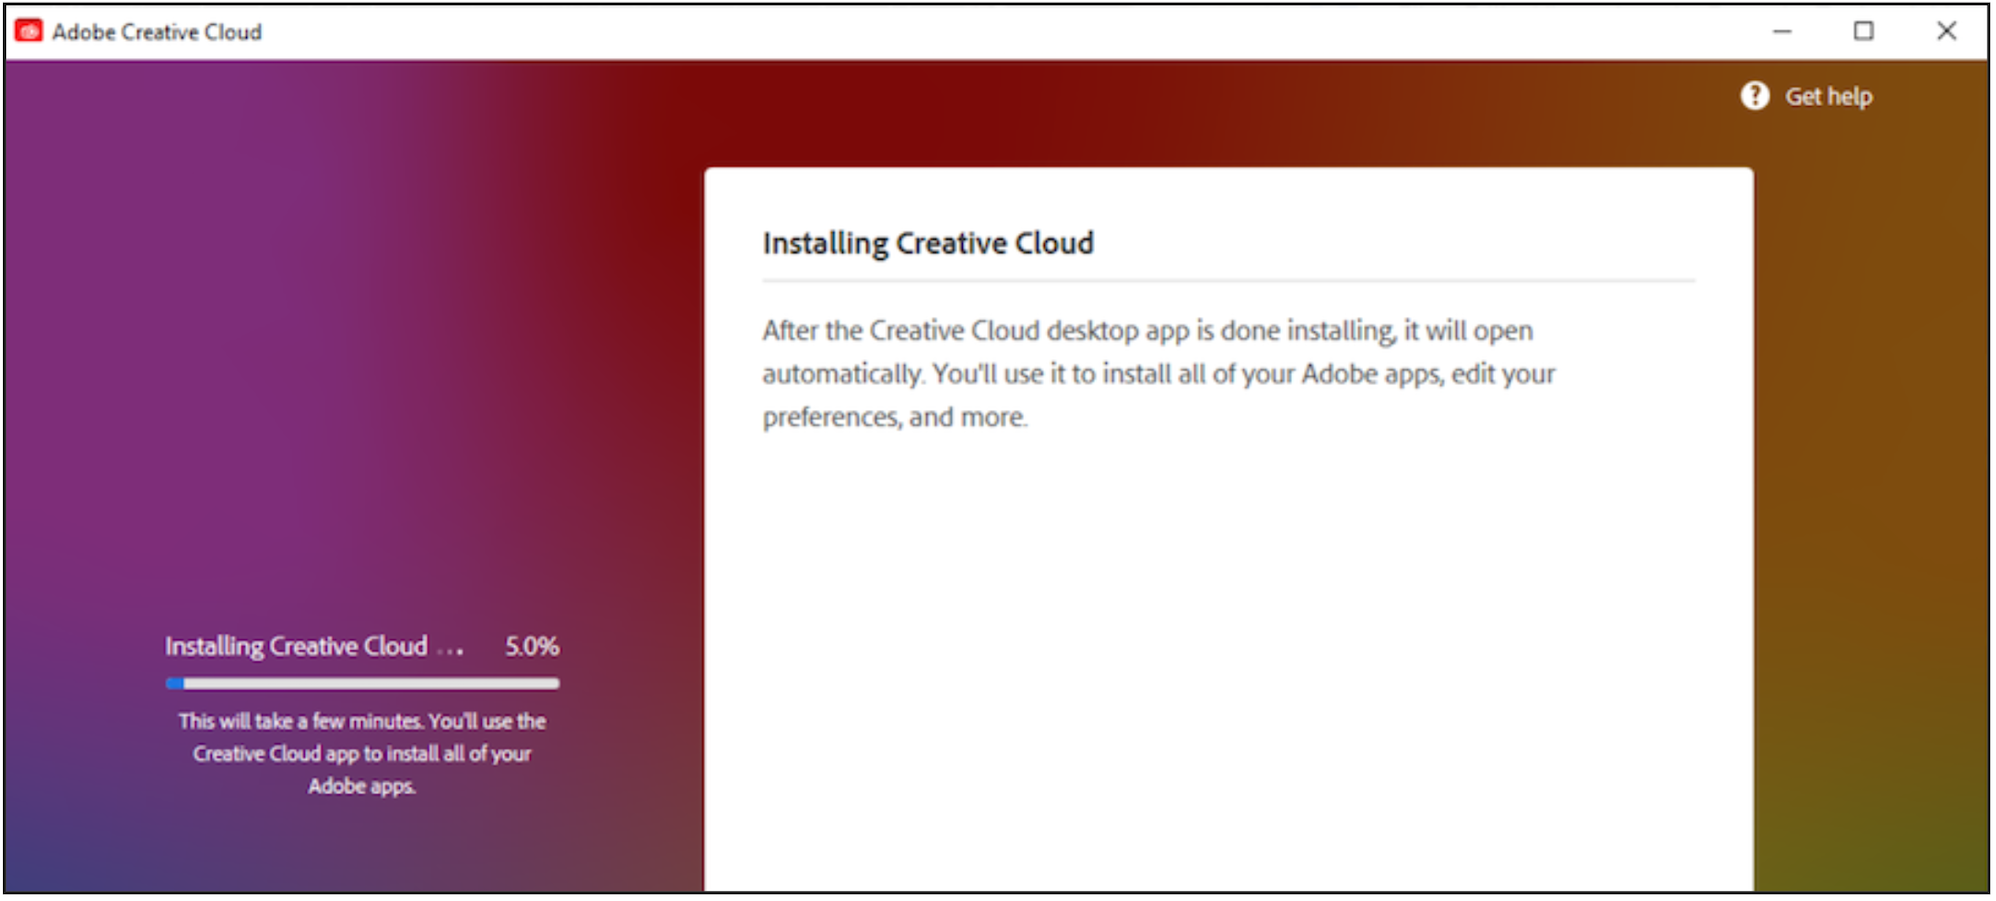 An Adobe Creative Cloud pop up screen displays the installing process for the Adobe desktop application.